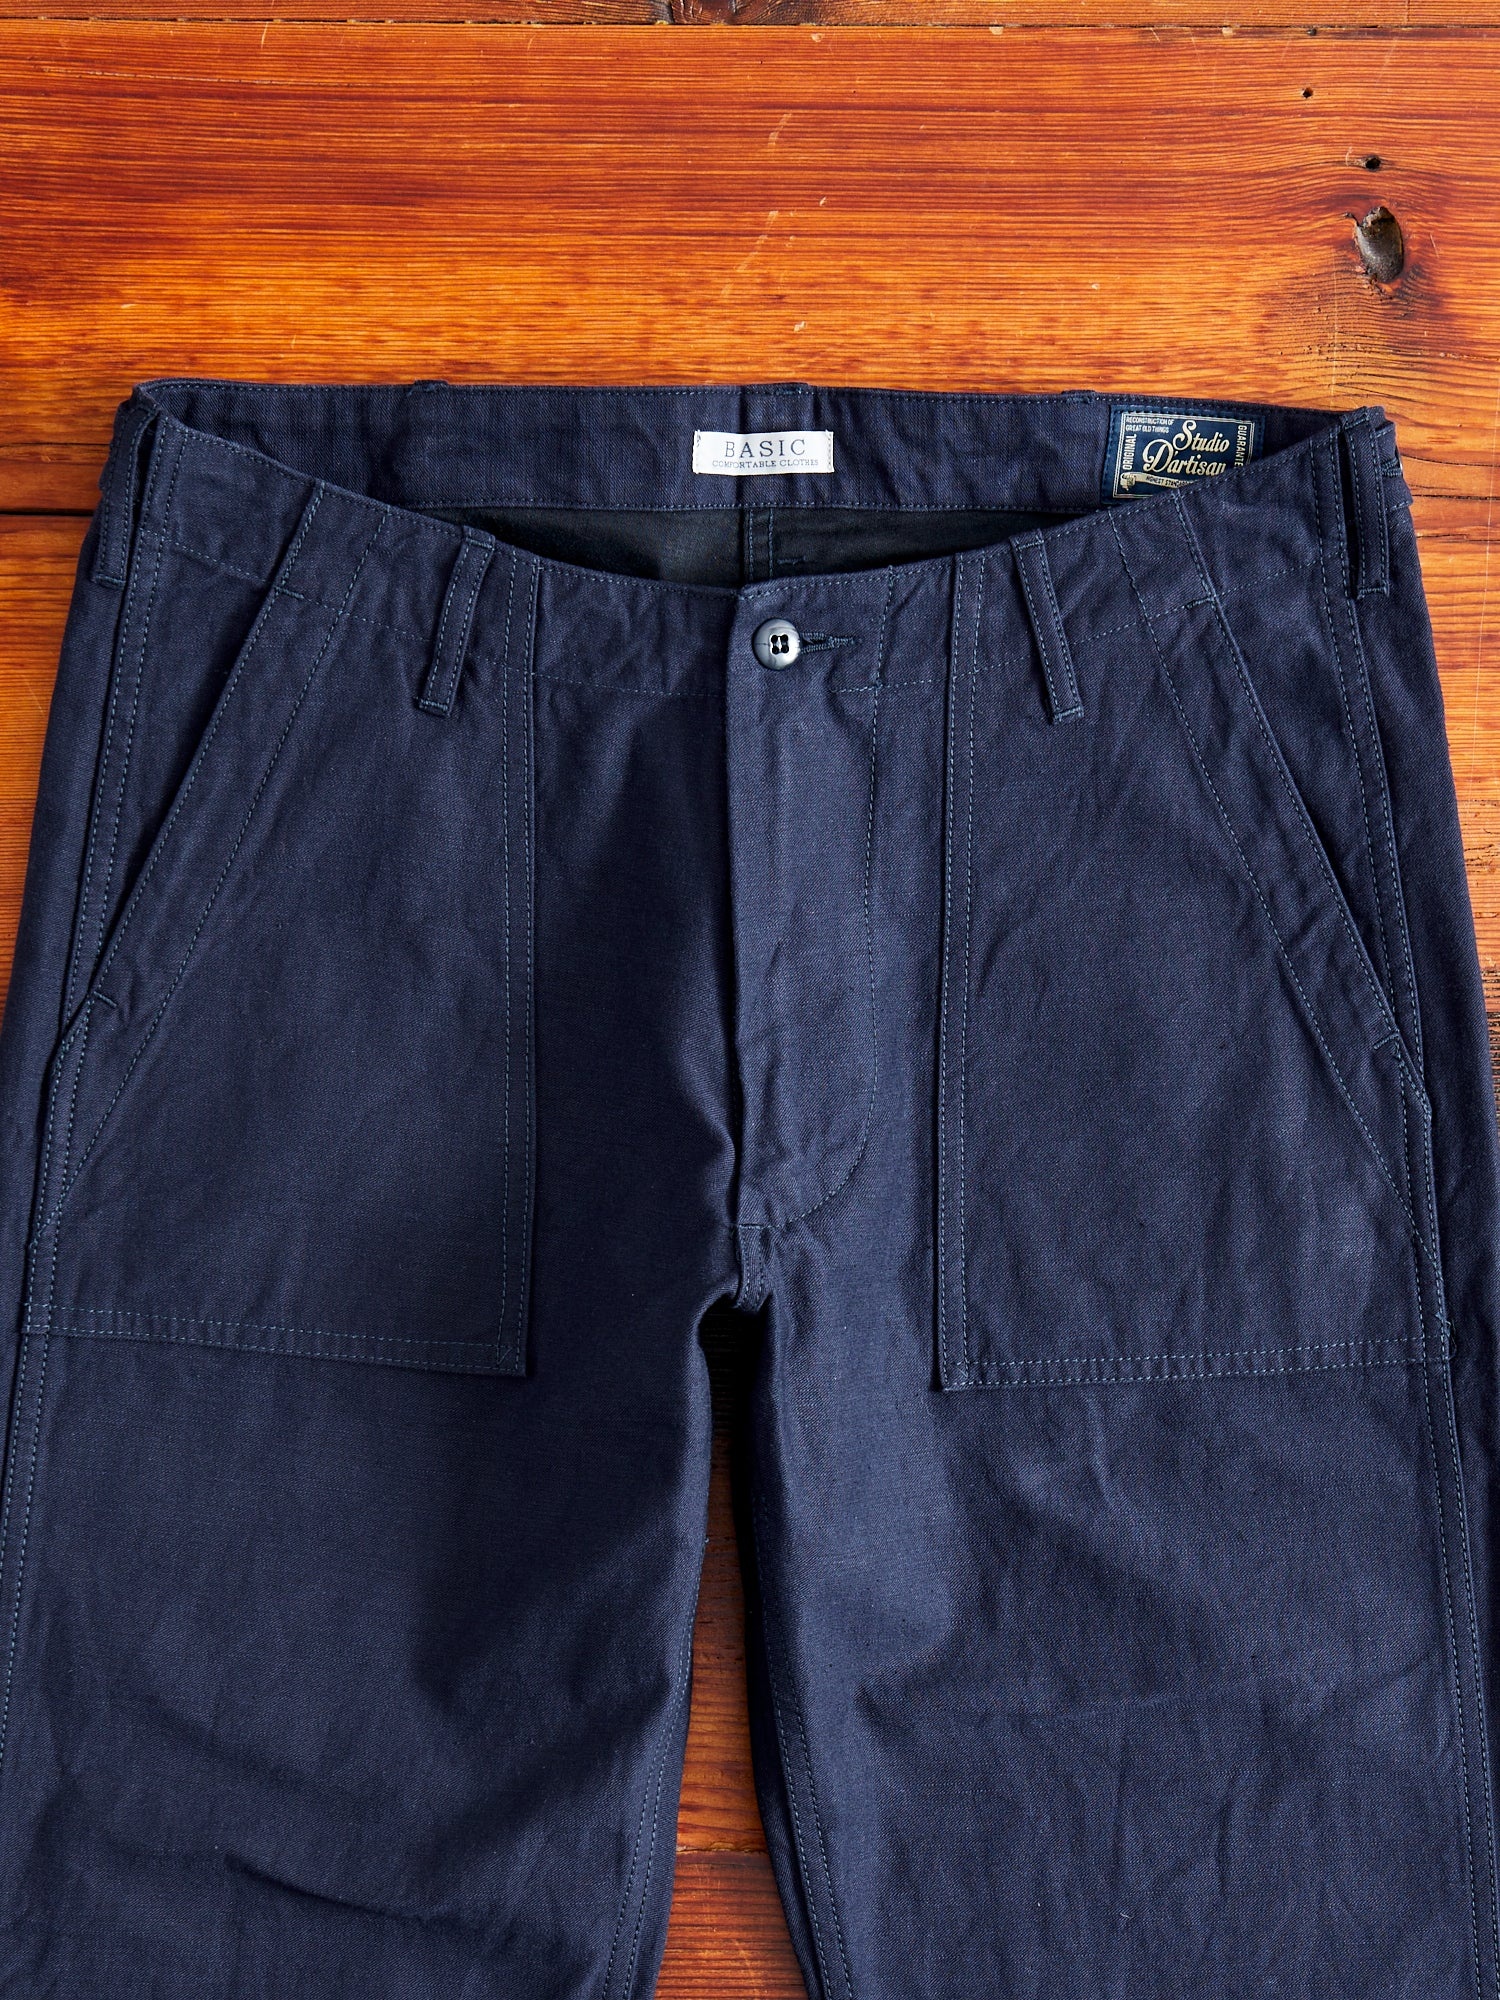 1811-IND Military Baker Pants in Indigo - 3